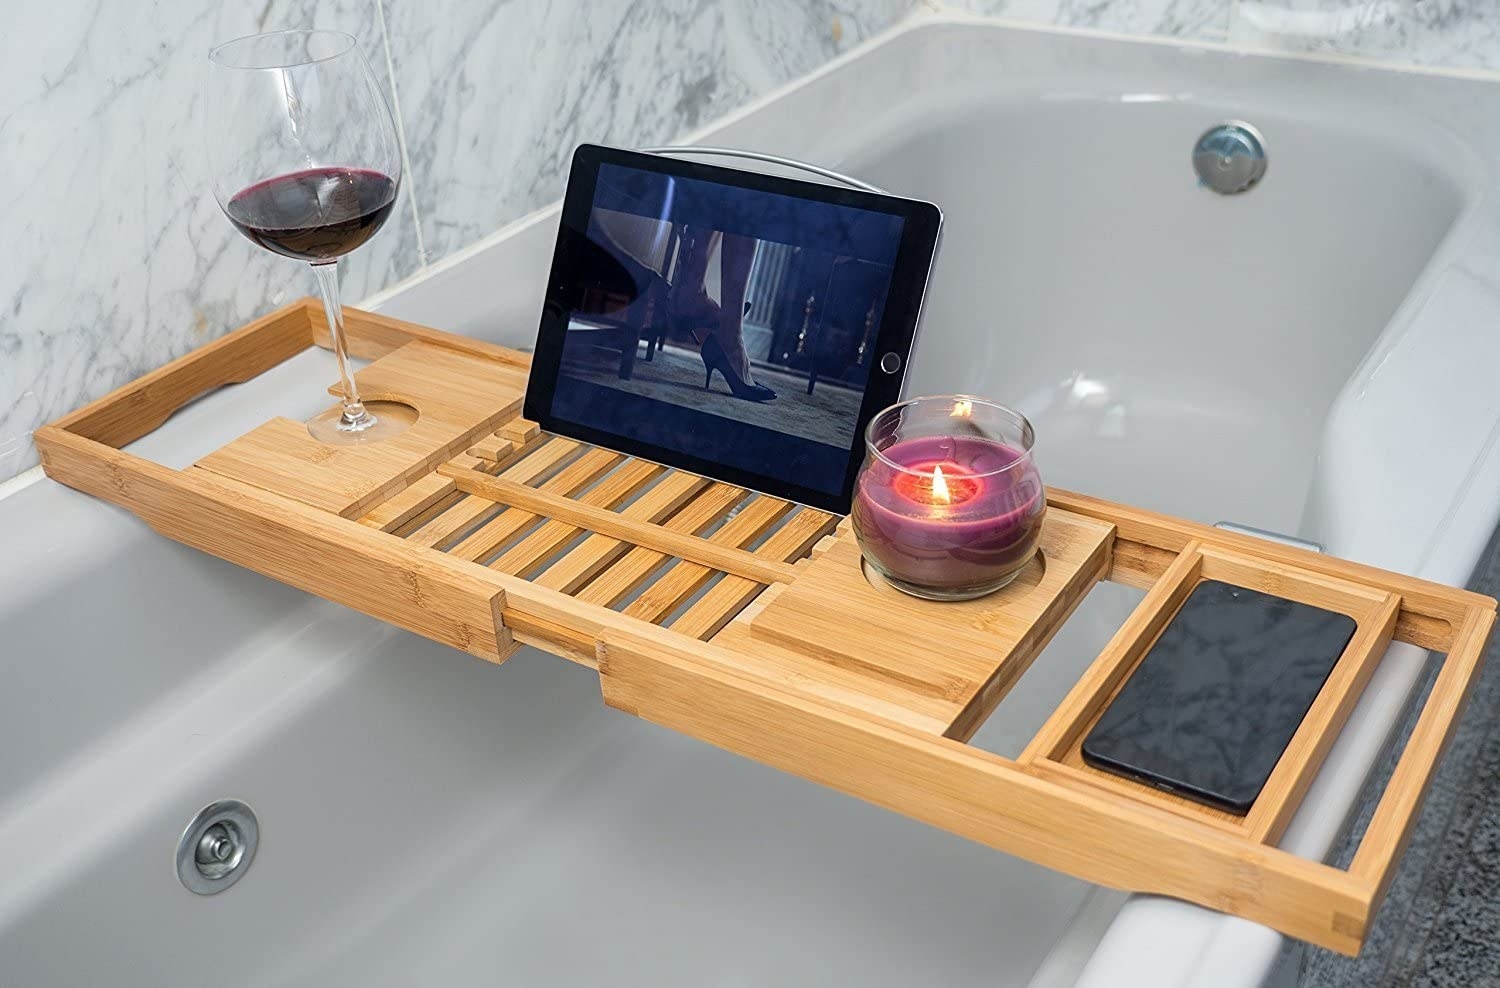 The bath caddy with a candle, wine glass, and tablet on it